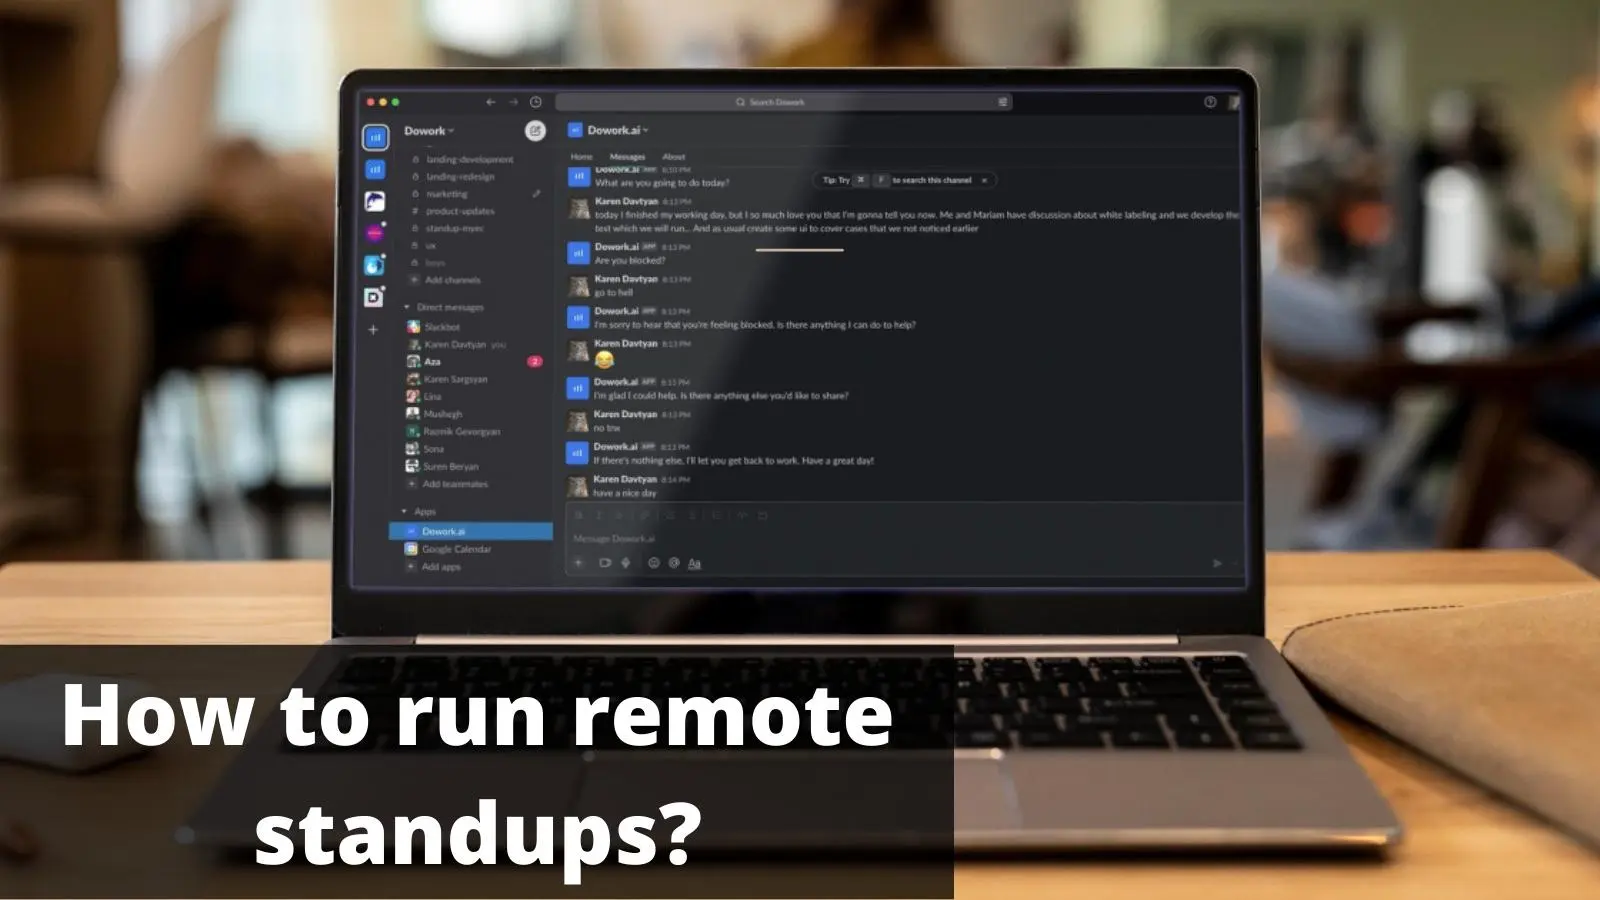 How To Run Remote Standups?